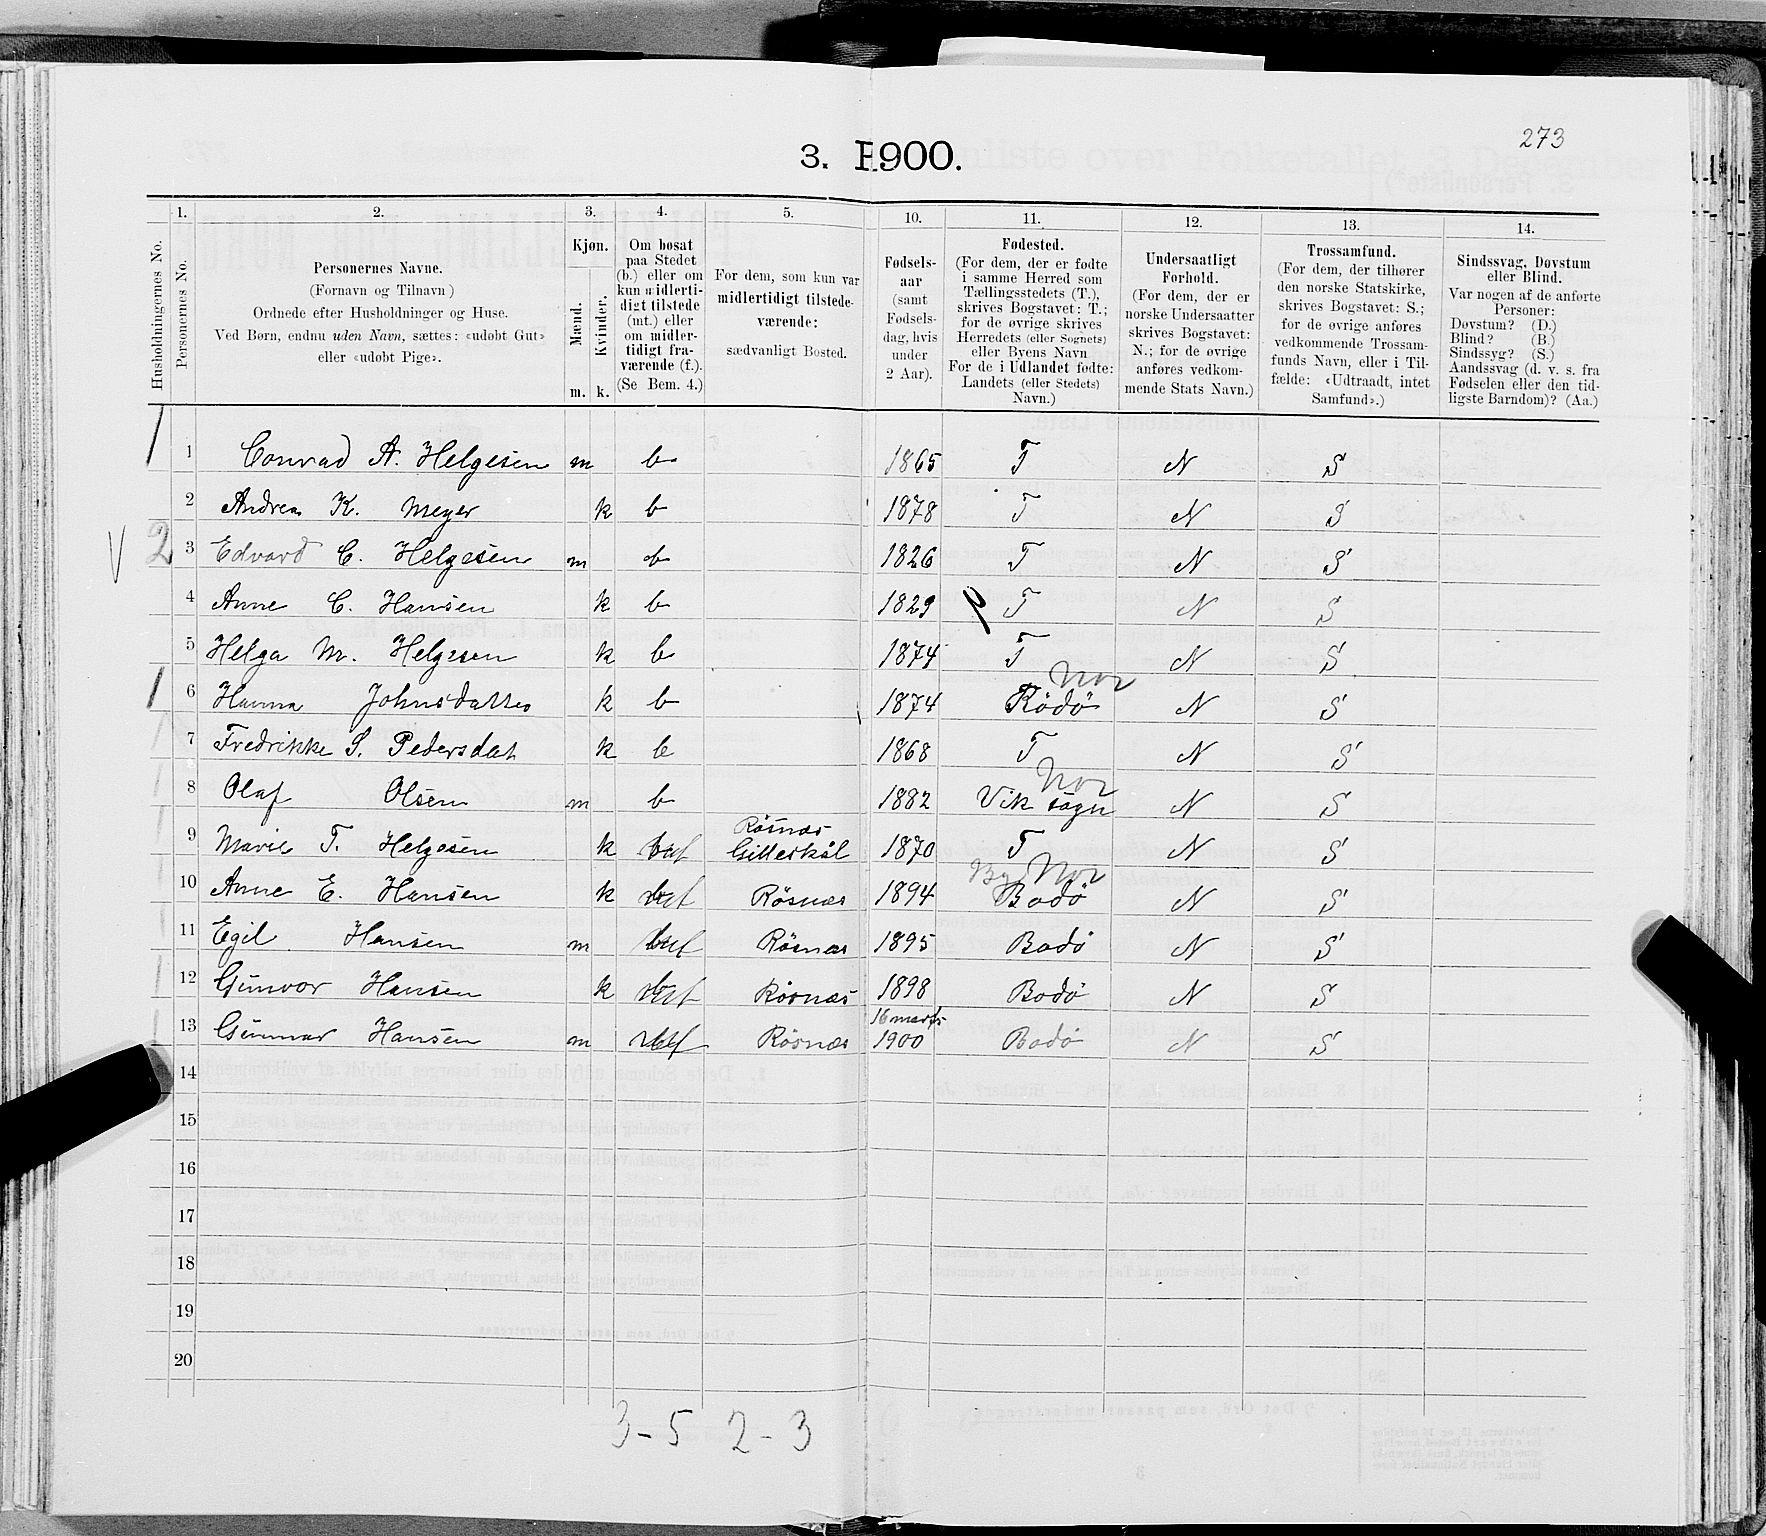 SAT, 1900 census for Meløy, 1900, p. 1359